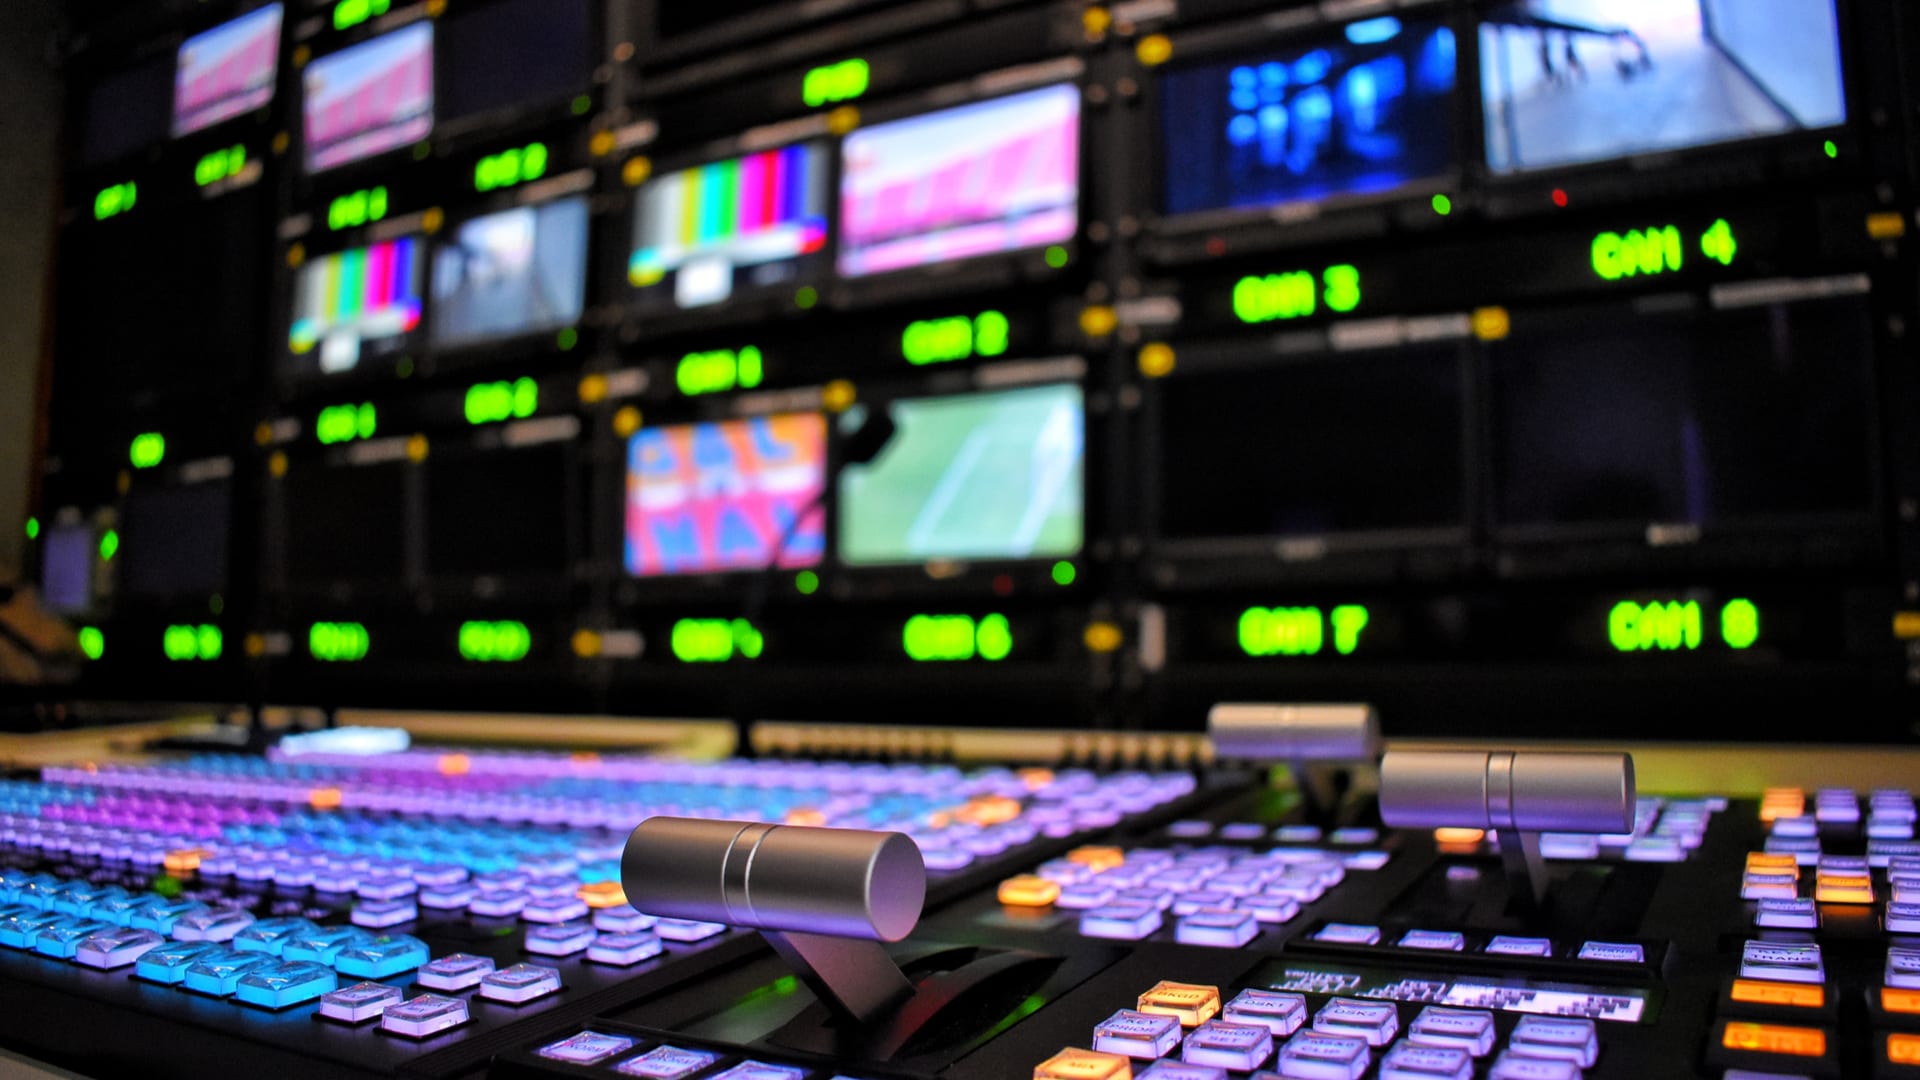 Tv broadcast systems system insertion key features azurewebsites